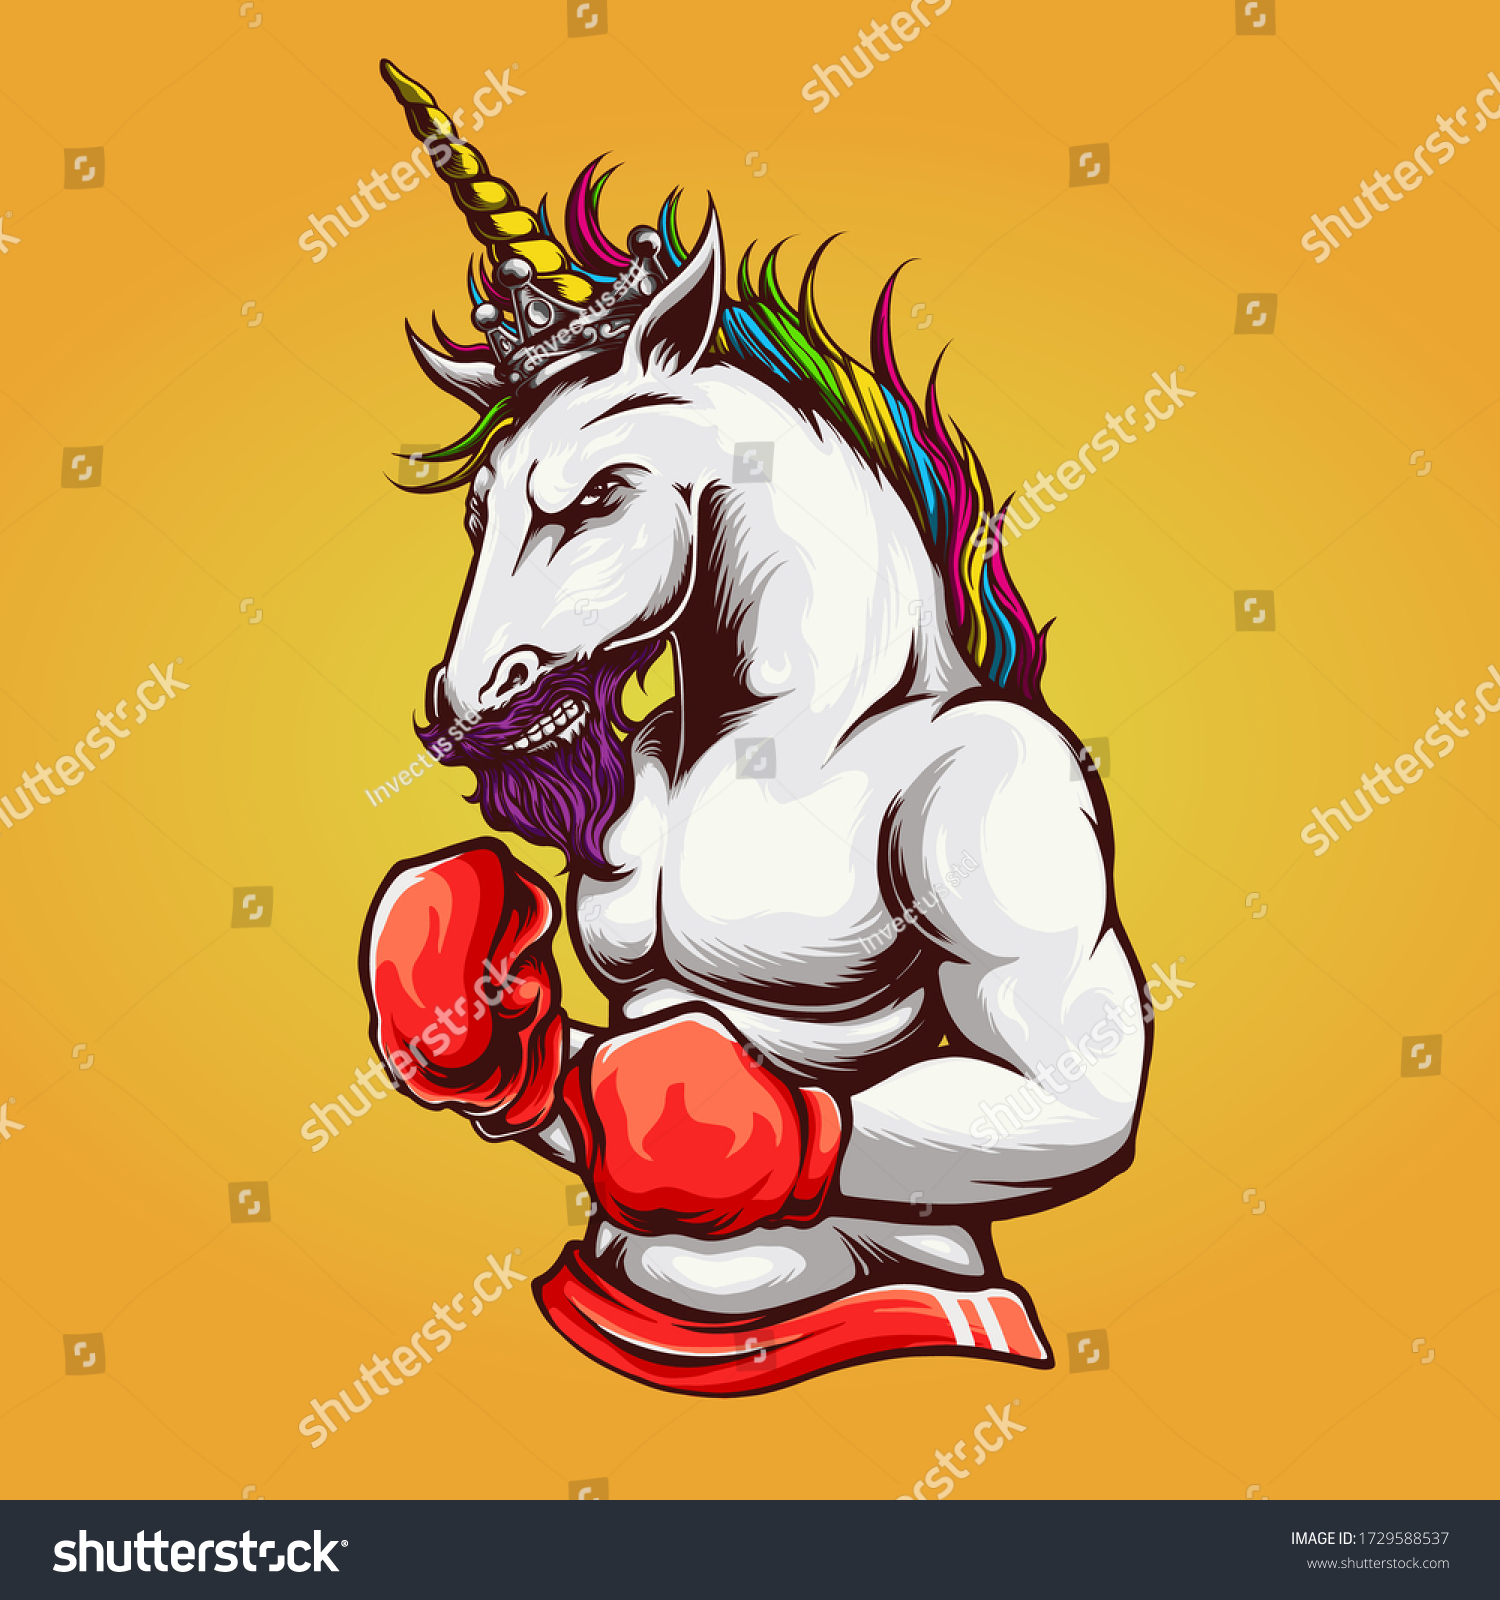 SVG of Unicorn Illustration perfect for tshirt design or clothing brand / apparel svg